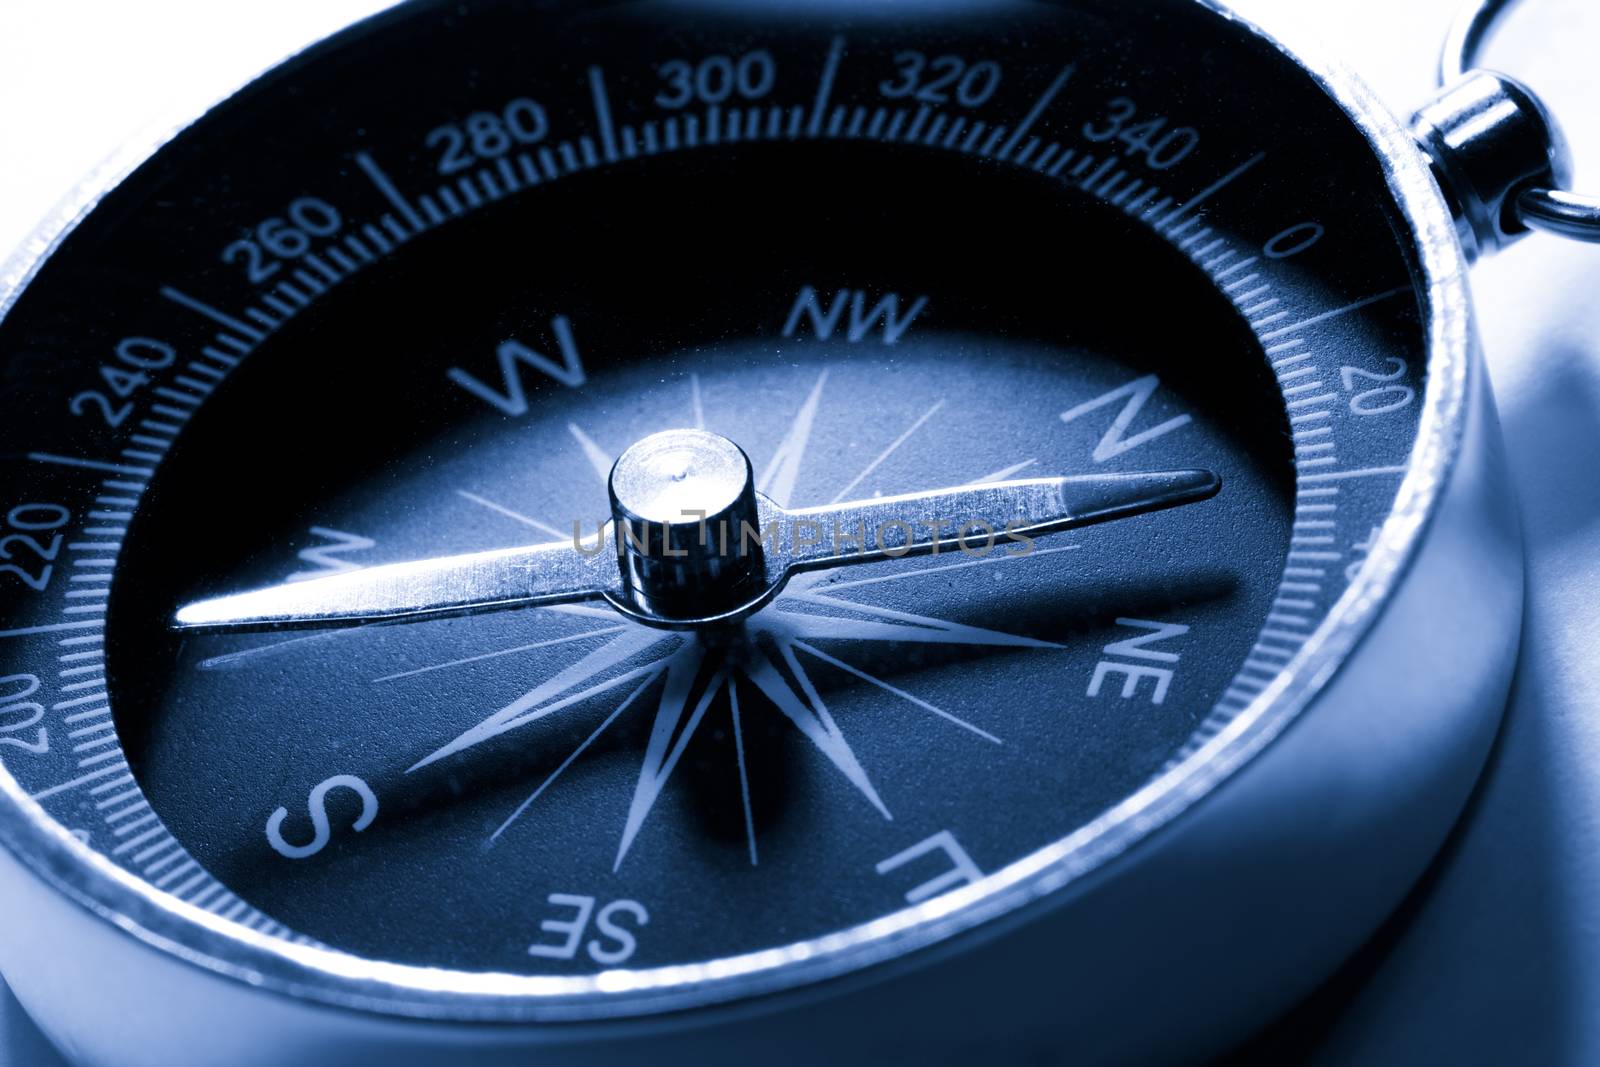 Compass in blue toning color